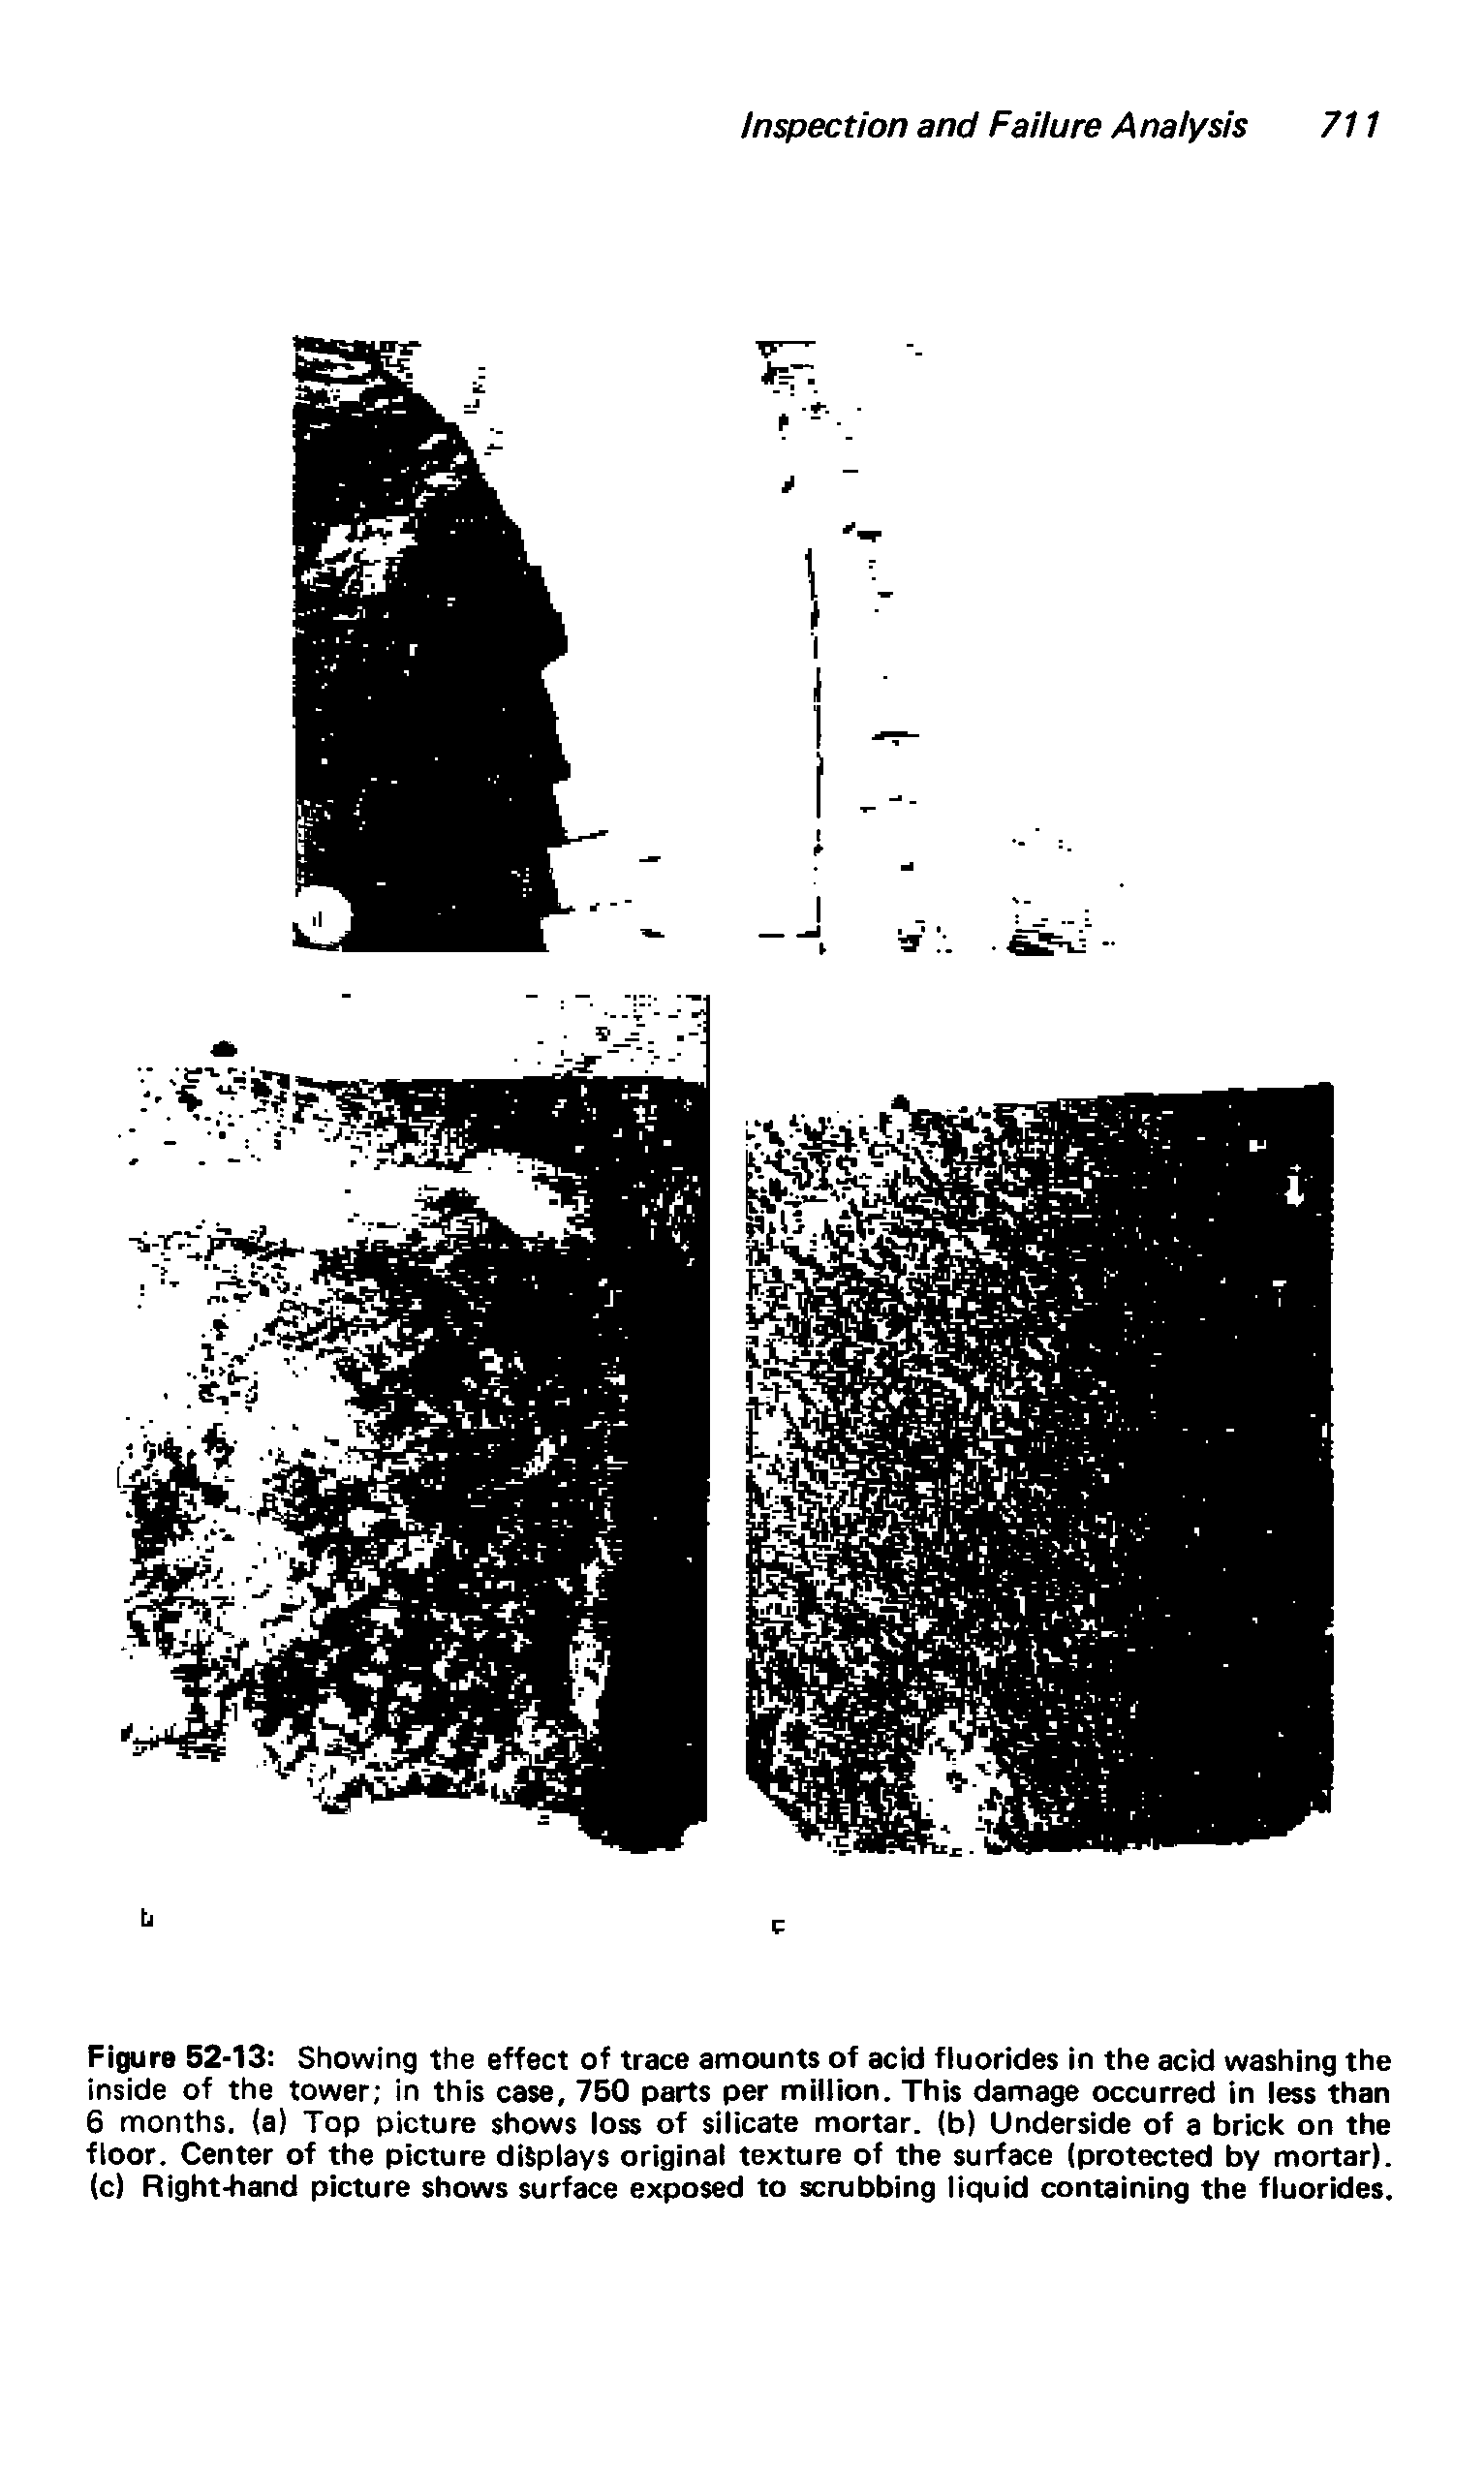 Figure 52-13 Showing the effect of trace amounts of acid fiuorides in the acid washing the inside of the tower in this case, 750 parts per million. This damage occurred in less than 6 months, (a) Top picture shows loss of silicate mortar, (b) Underside of a brick on the floor. Center of the picture displays original texture of the surface (protected by mortar), (c) Right-hand picture shows surface exposed to scrubbing liquid containing the fluorides.